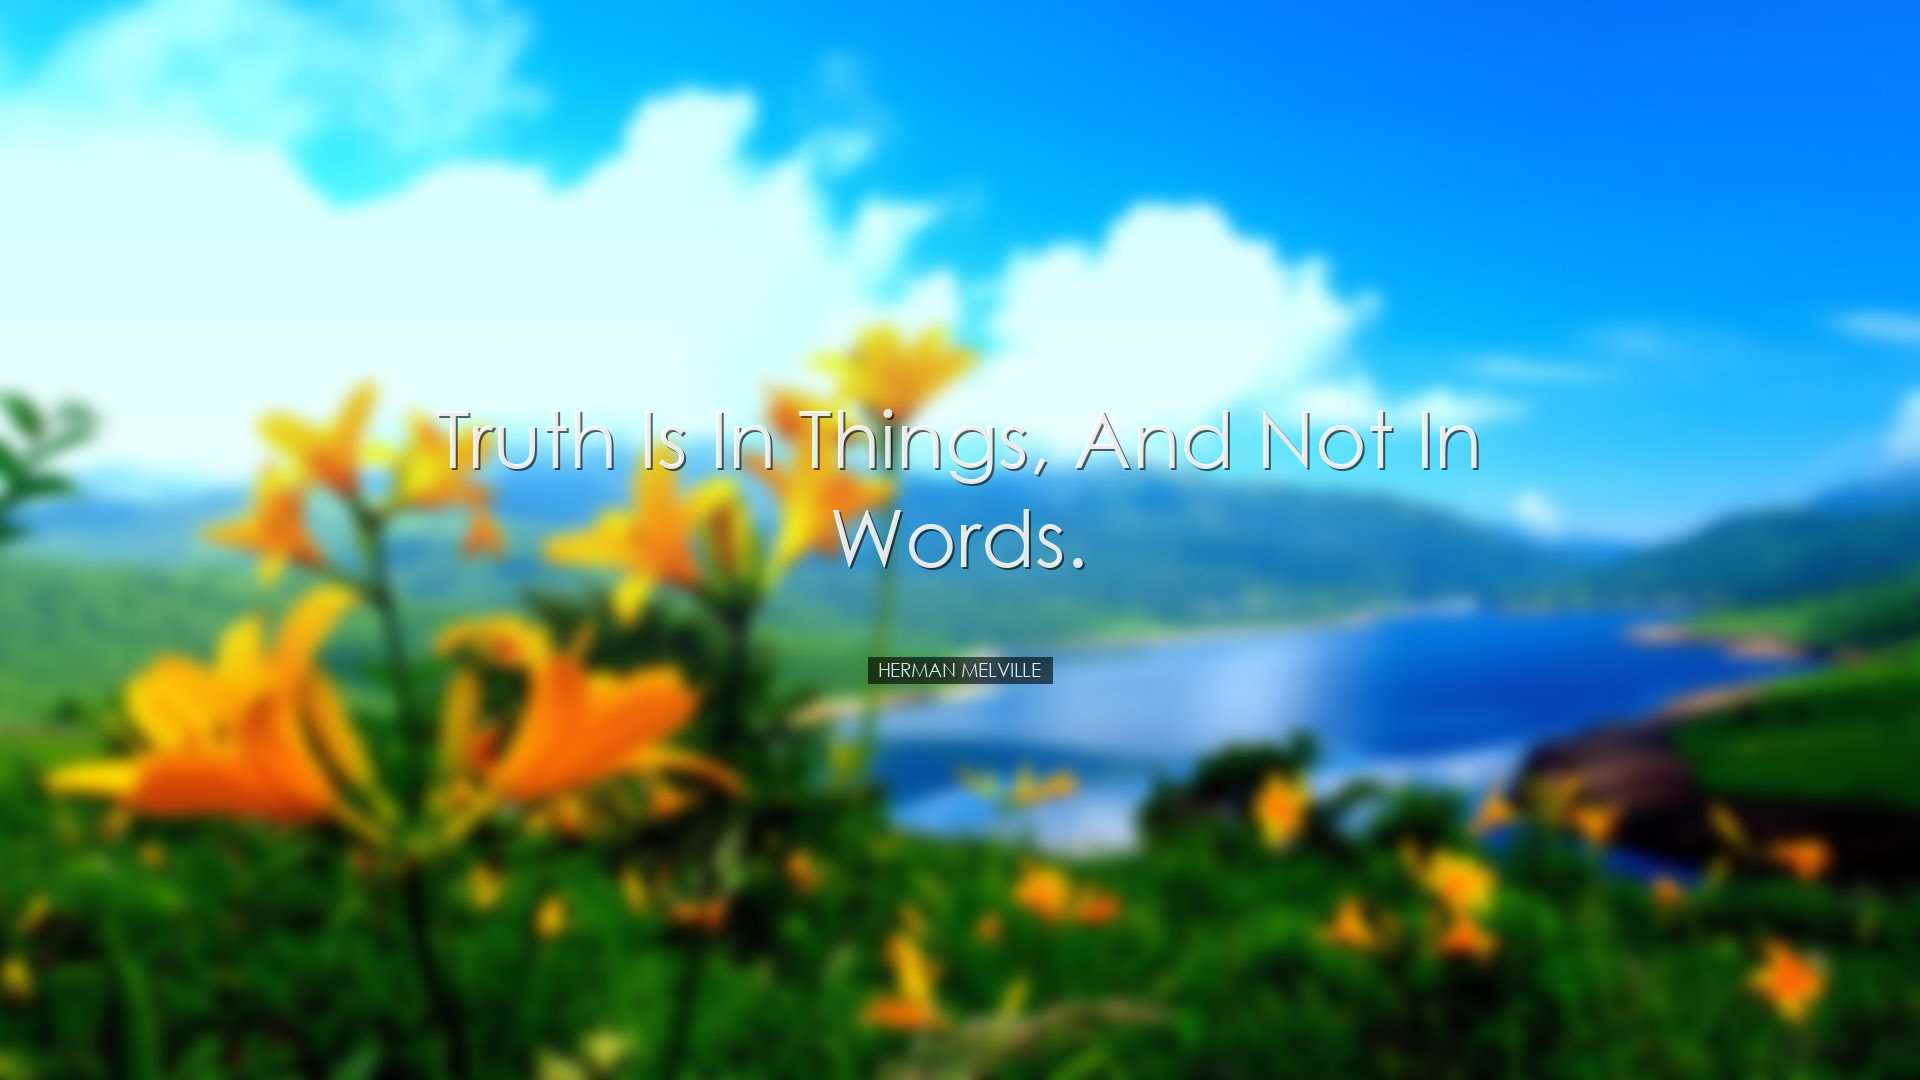 Truth is in things, and not in words. - Herman Melville